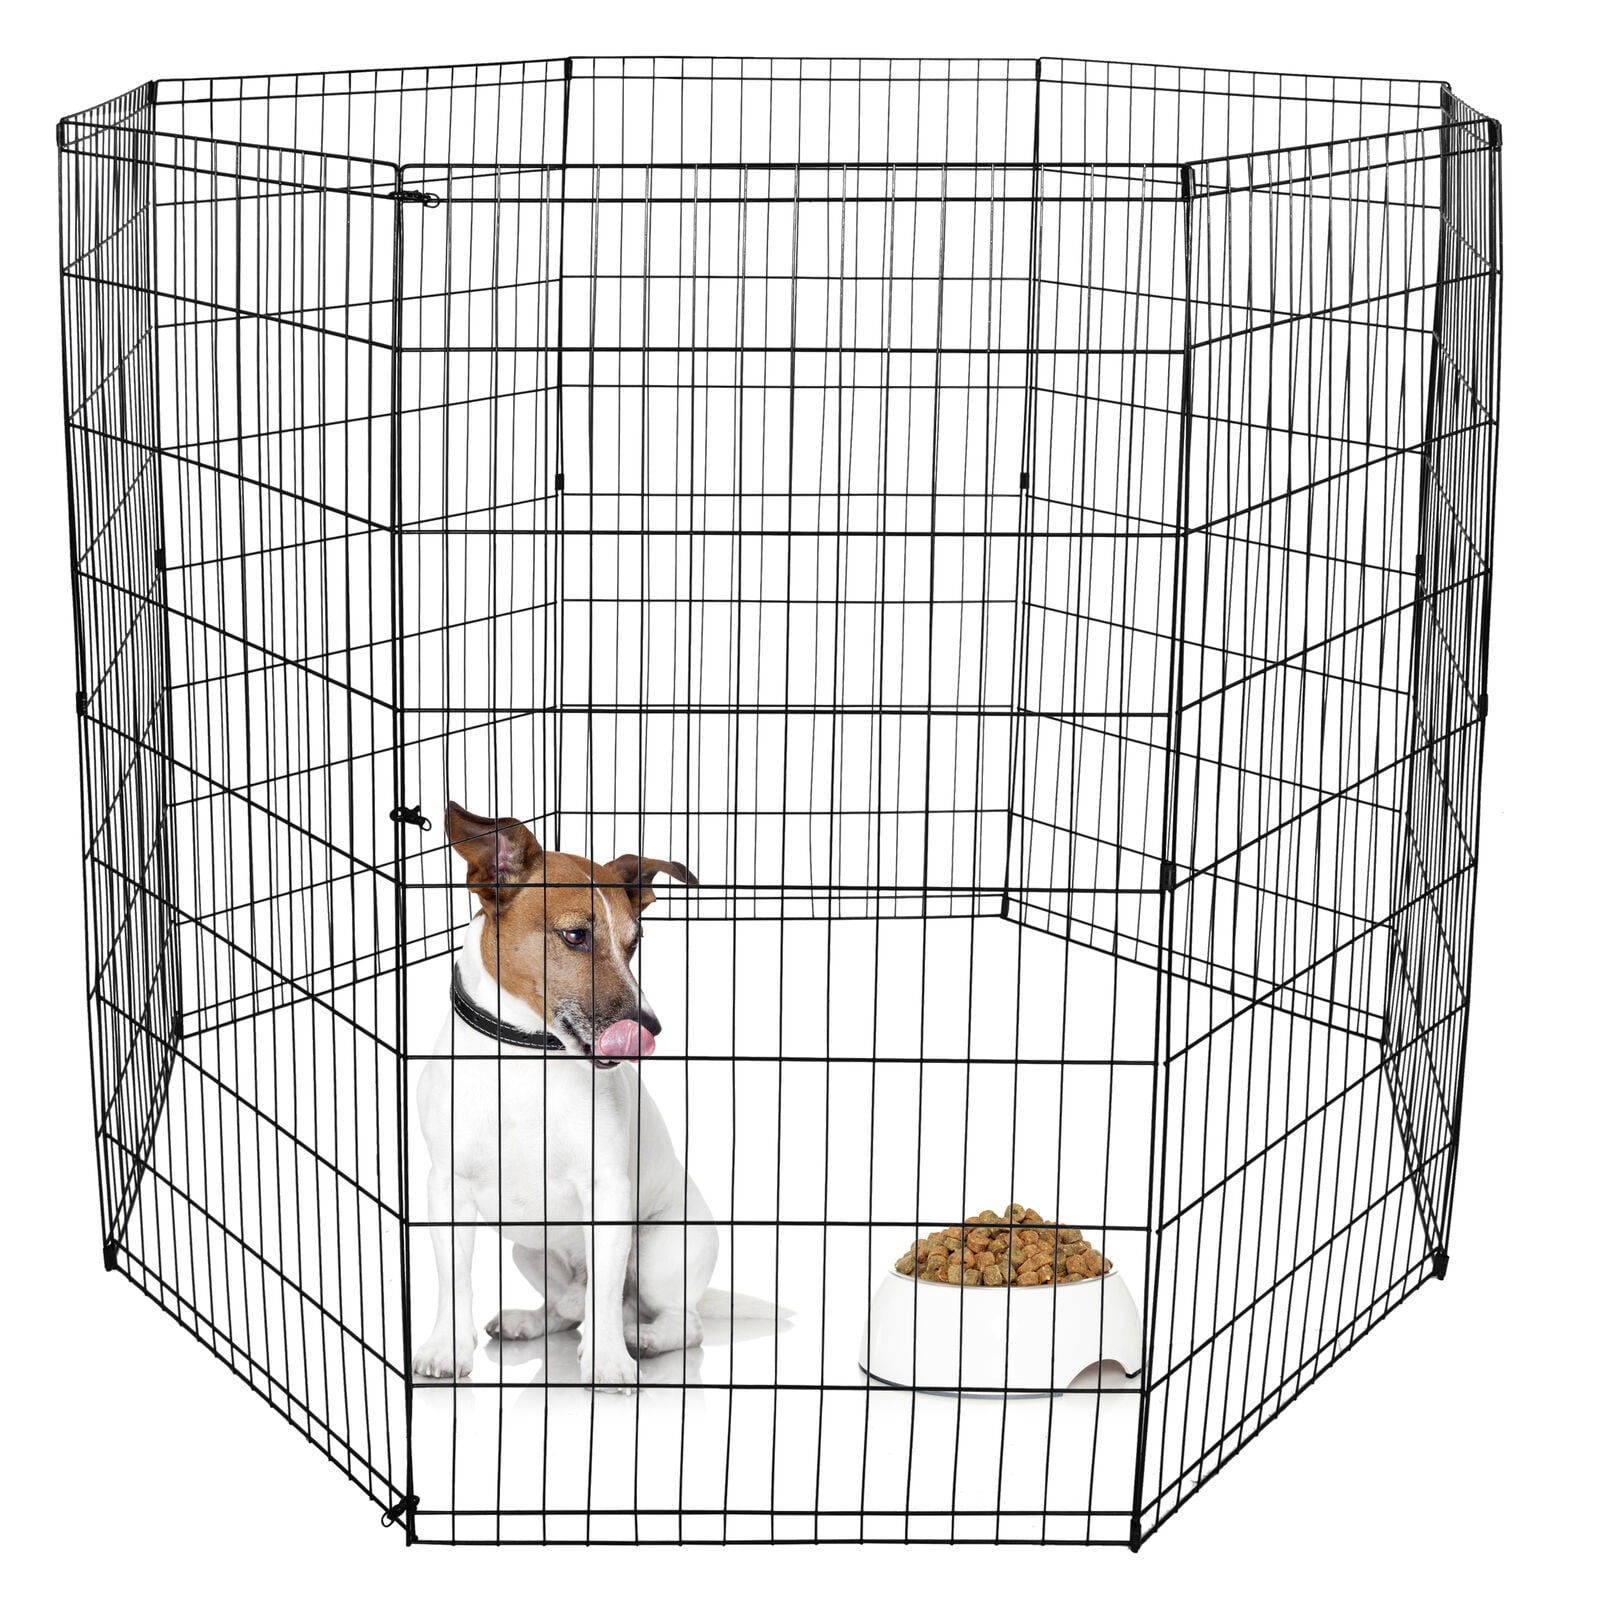 Hamster Rabbits Puppy Playpen Fence Pet Play Pen Exercise Cage Panel Kennel New 